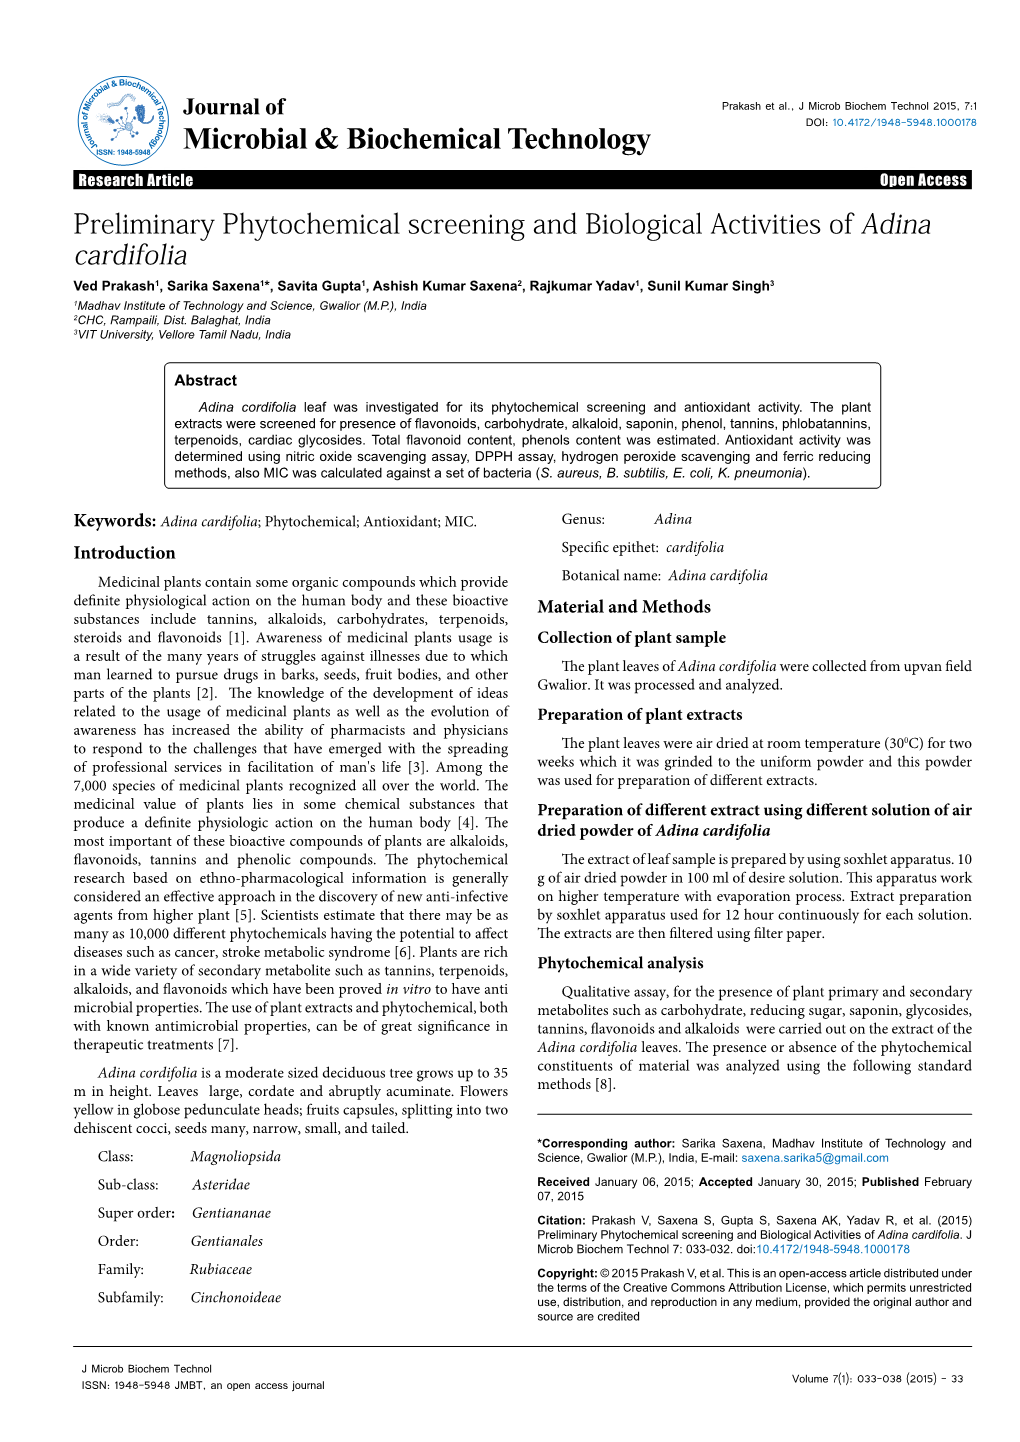 Preliminary Phytochemical Screening and Biological Activities of Adina